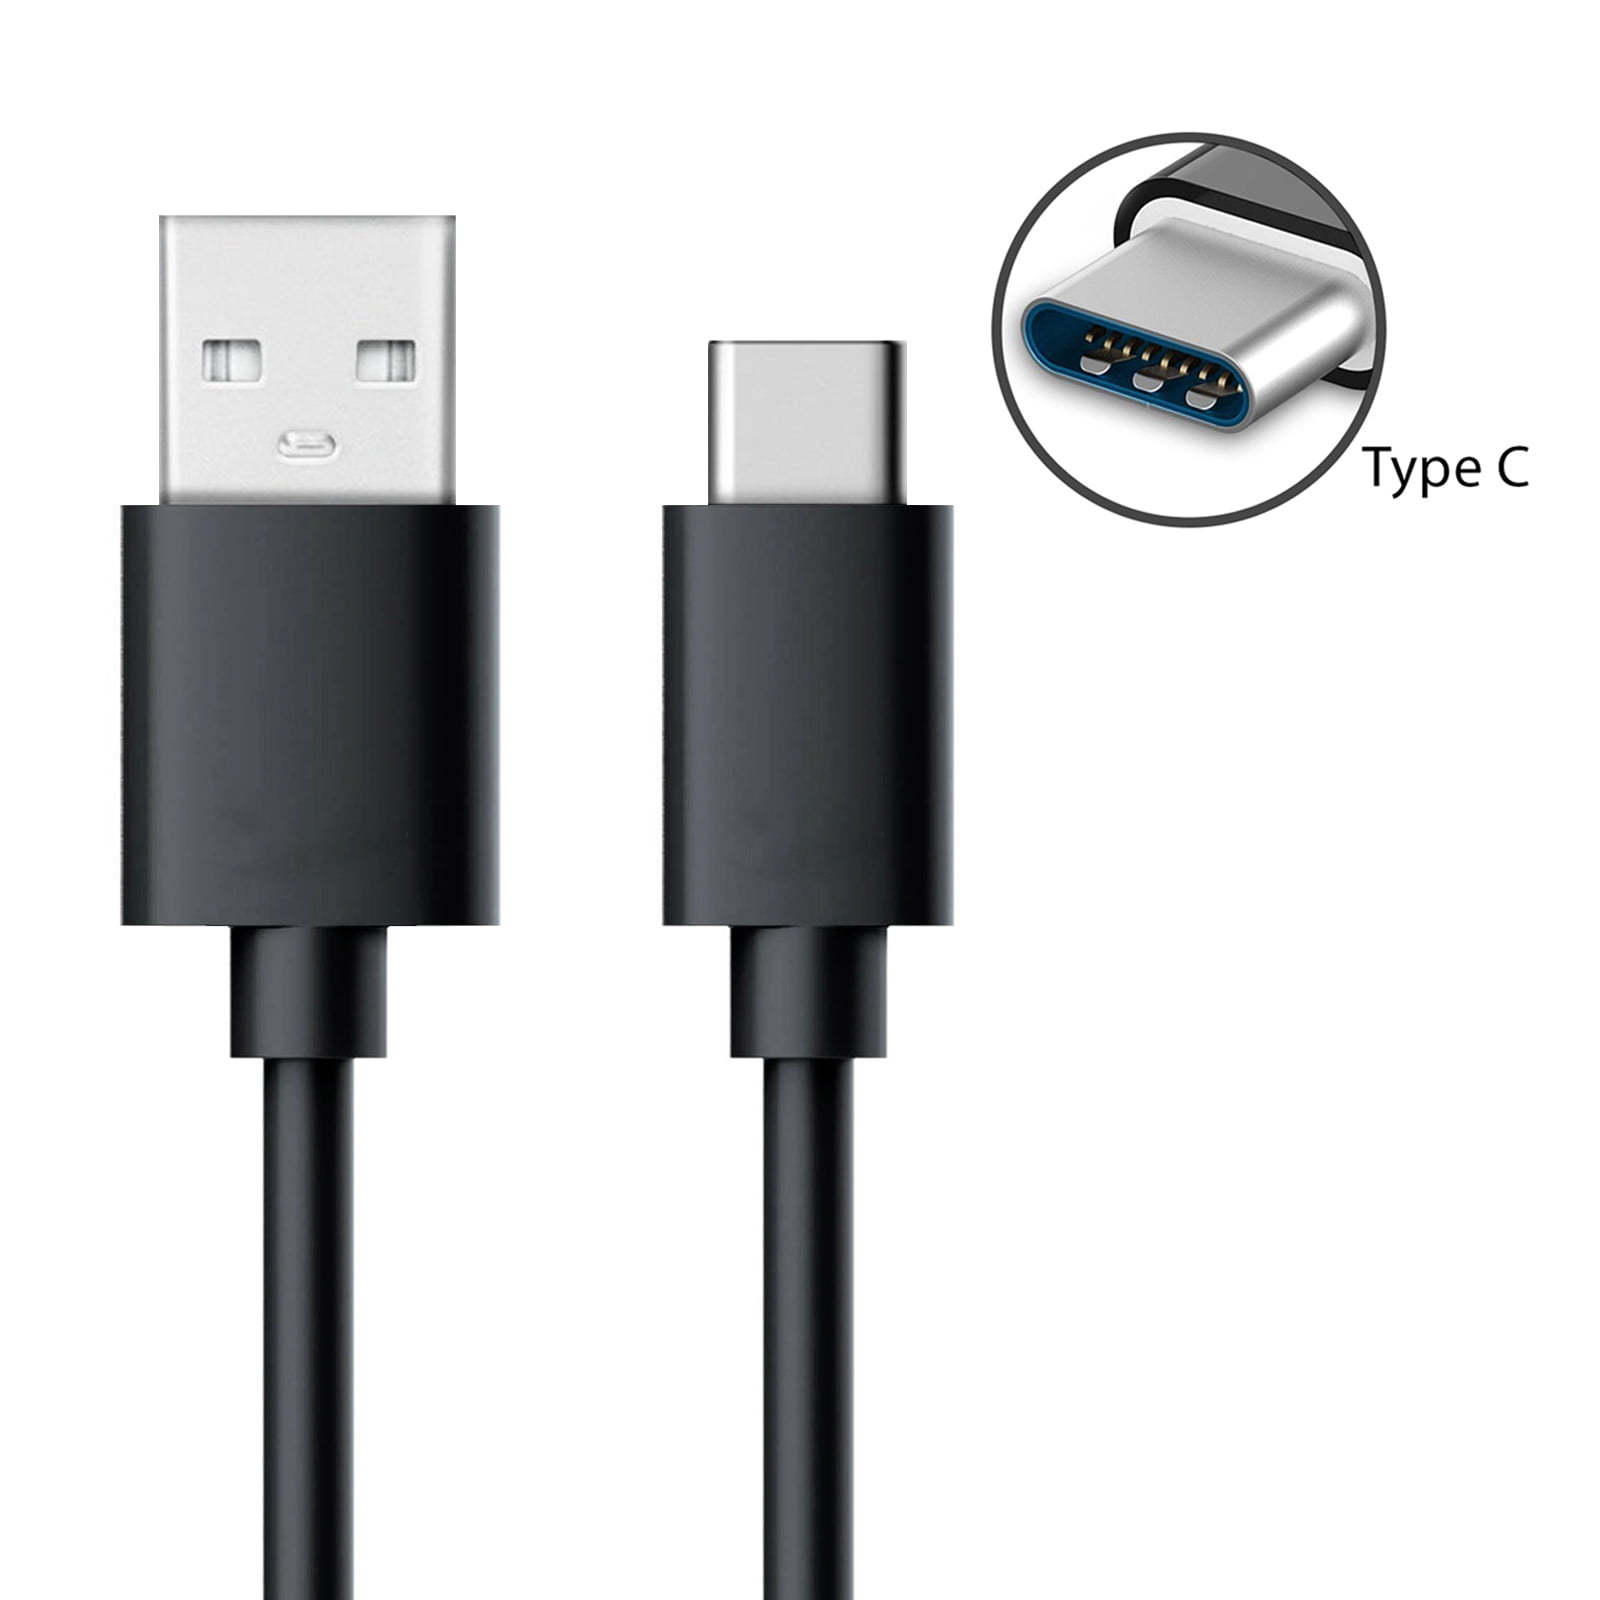 Xiaomi Mi6 & Max 2 and for Galaxy S8 & S8 LYNHJCData Cable Fast Charging line 1m 5A Wires Woven USB-C/Type-C to USB 2.0 Data Sync Quick Charger Cable Huawei P10 & P10 Plus/Oneplus 5 / LG G6